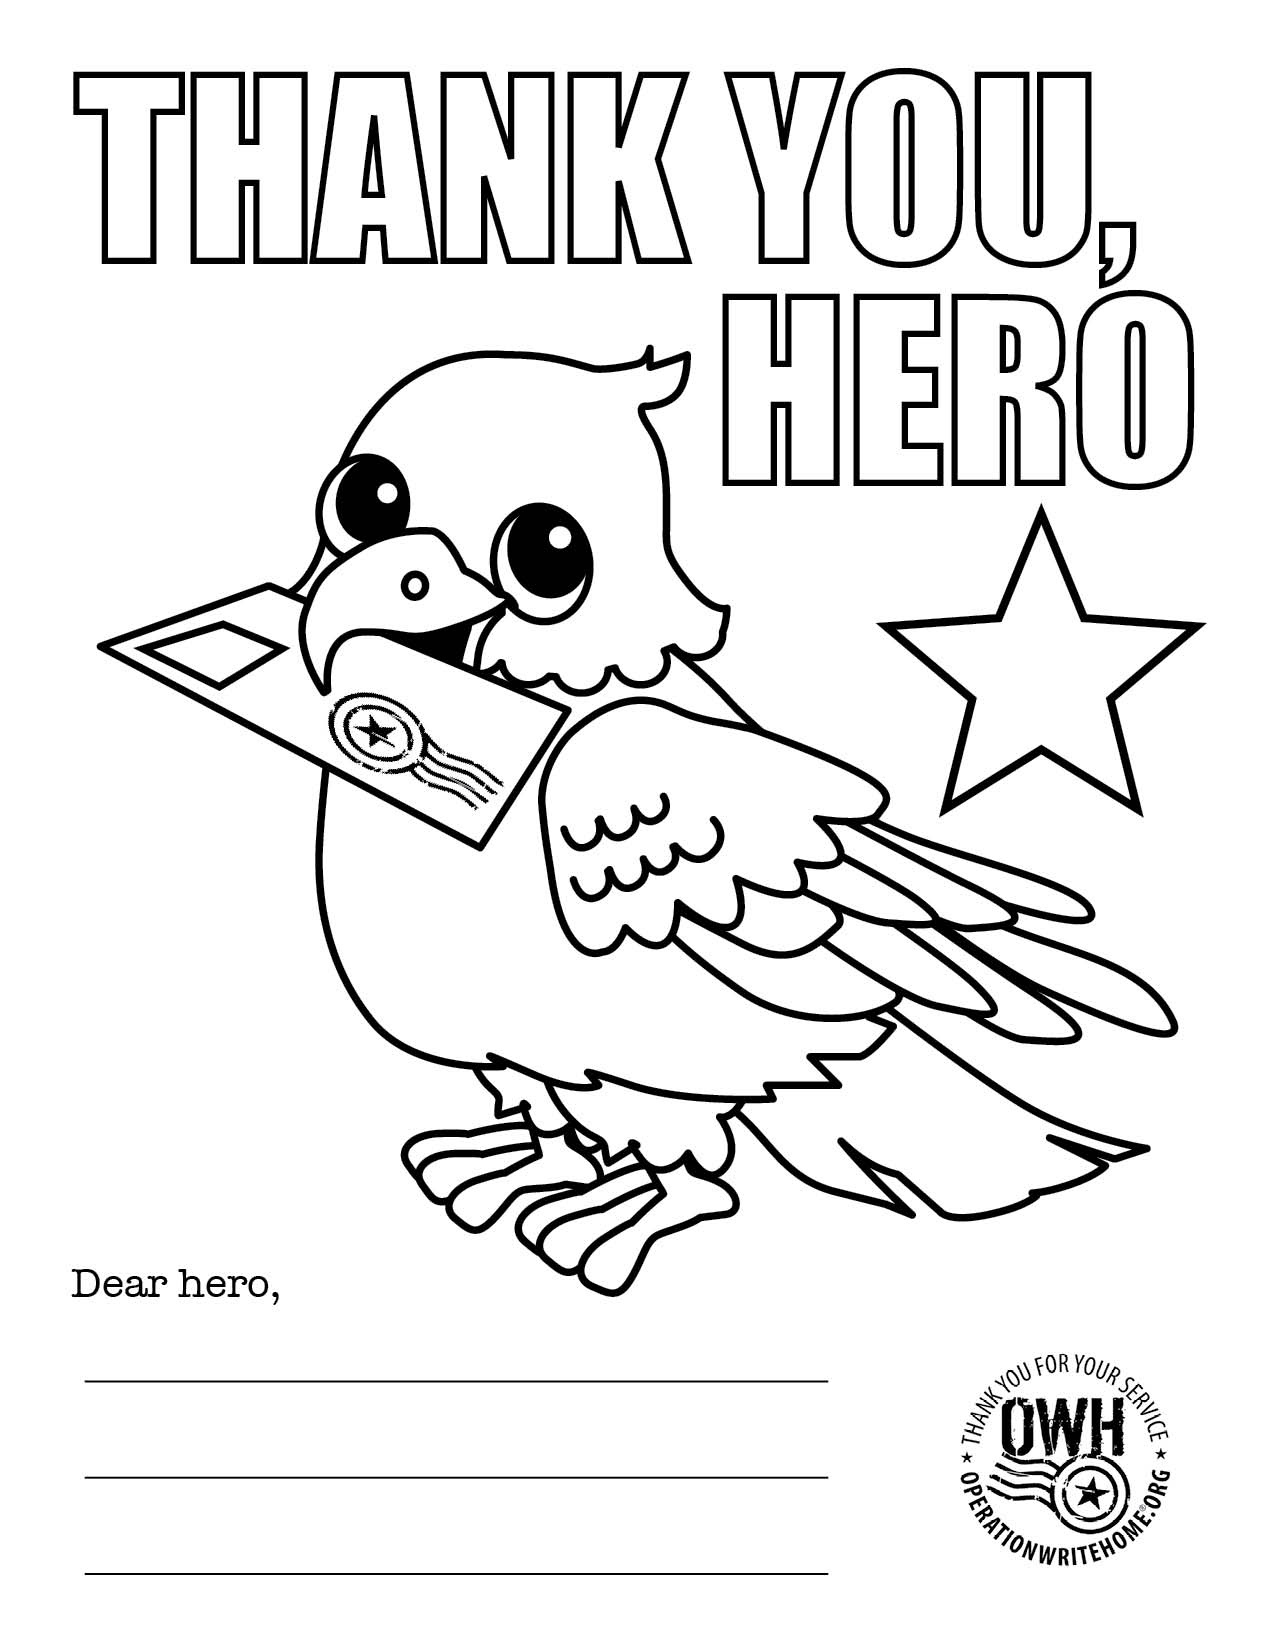 Coloring Pages : Coloring Ideas Happy Veterans Dayring Pages - Veterans Day Free Printable Cards